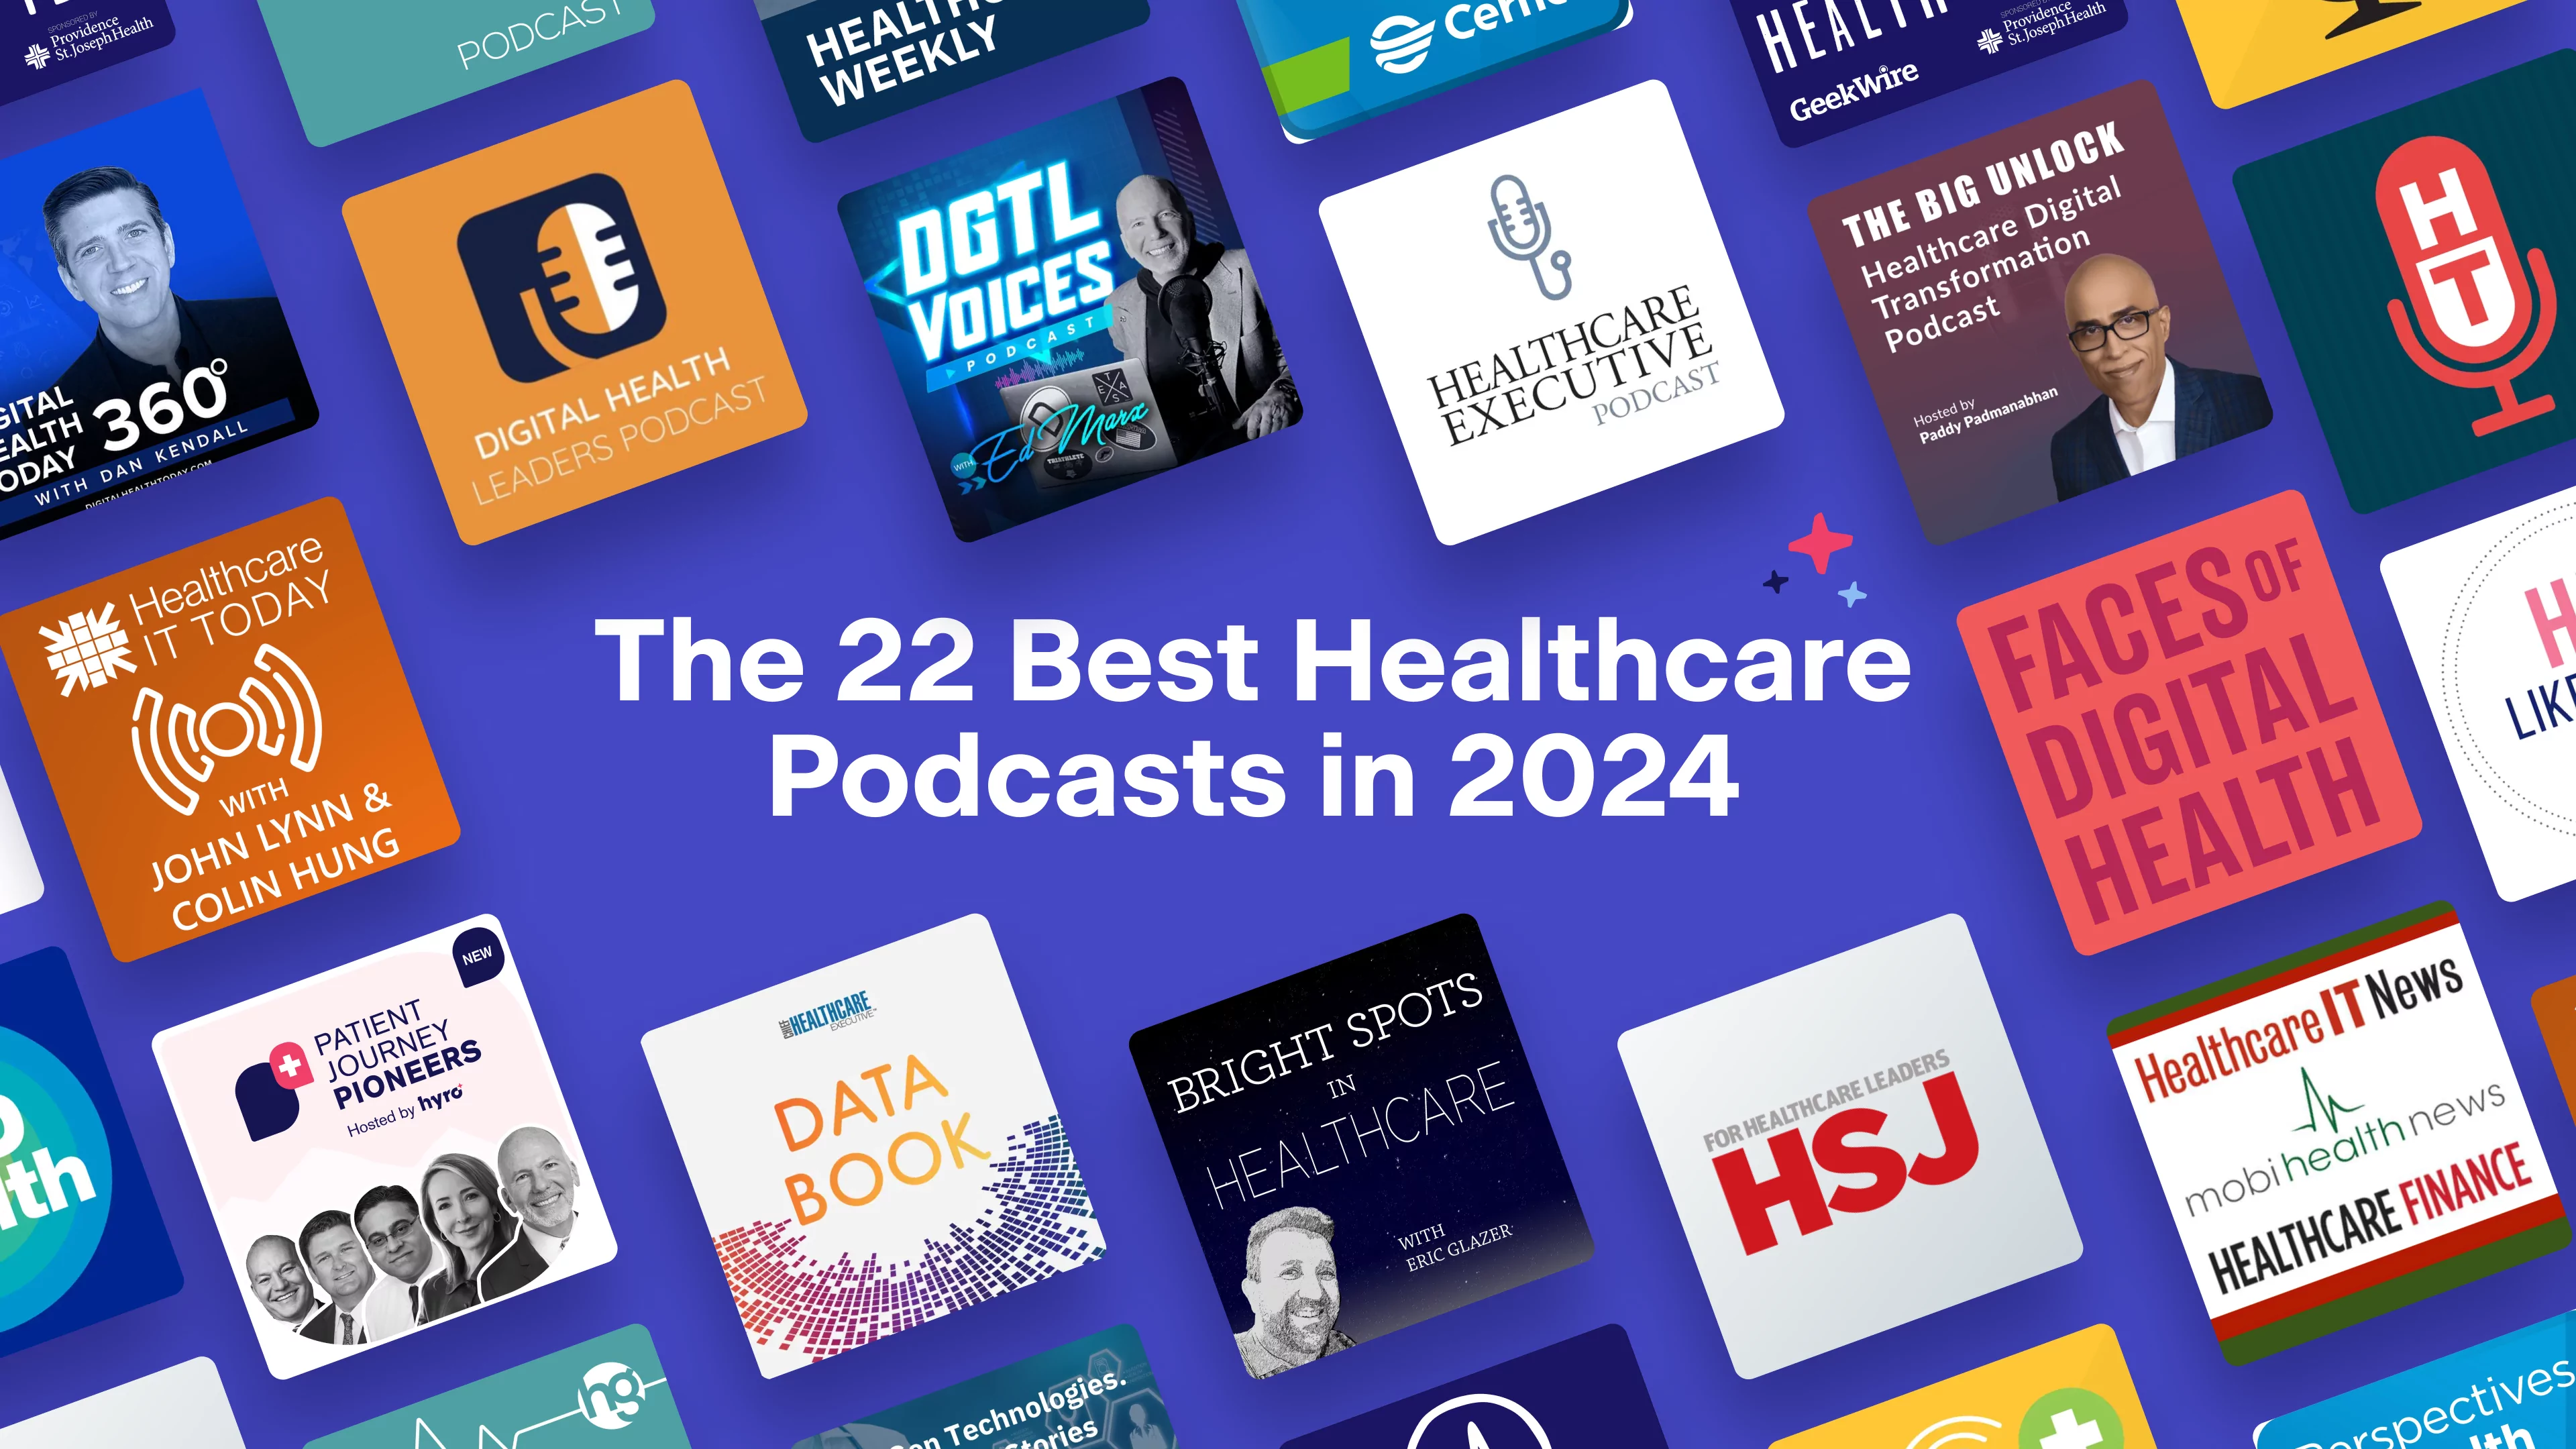 The 22 Best Healthcare Podcasts You Can’t Miss in 2024